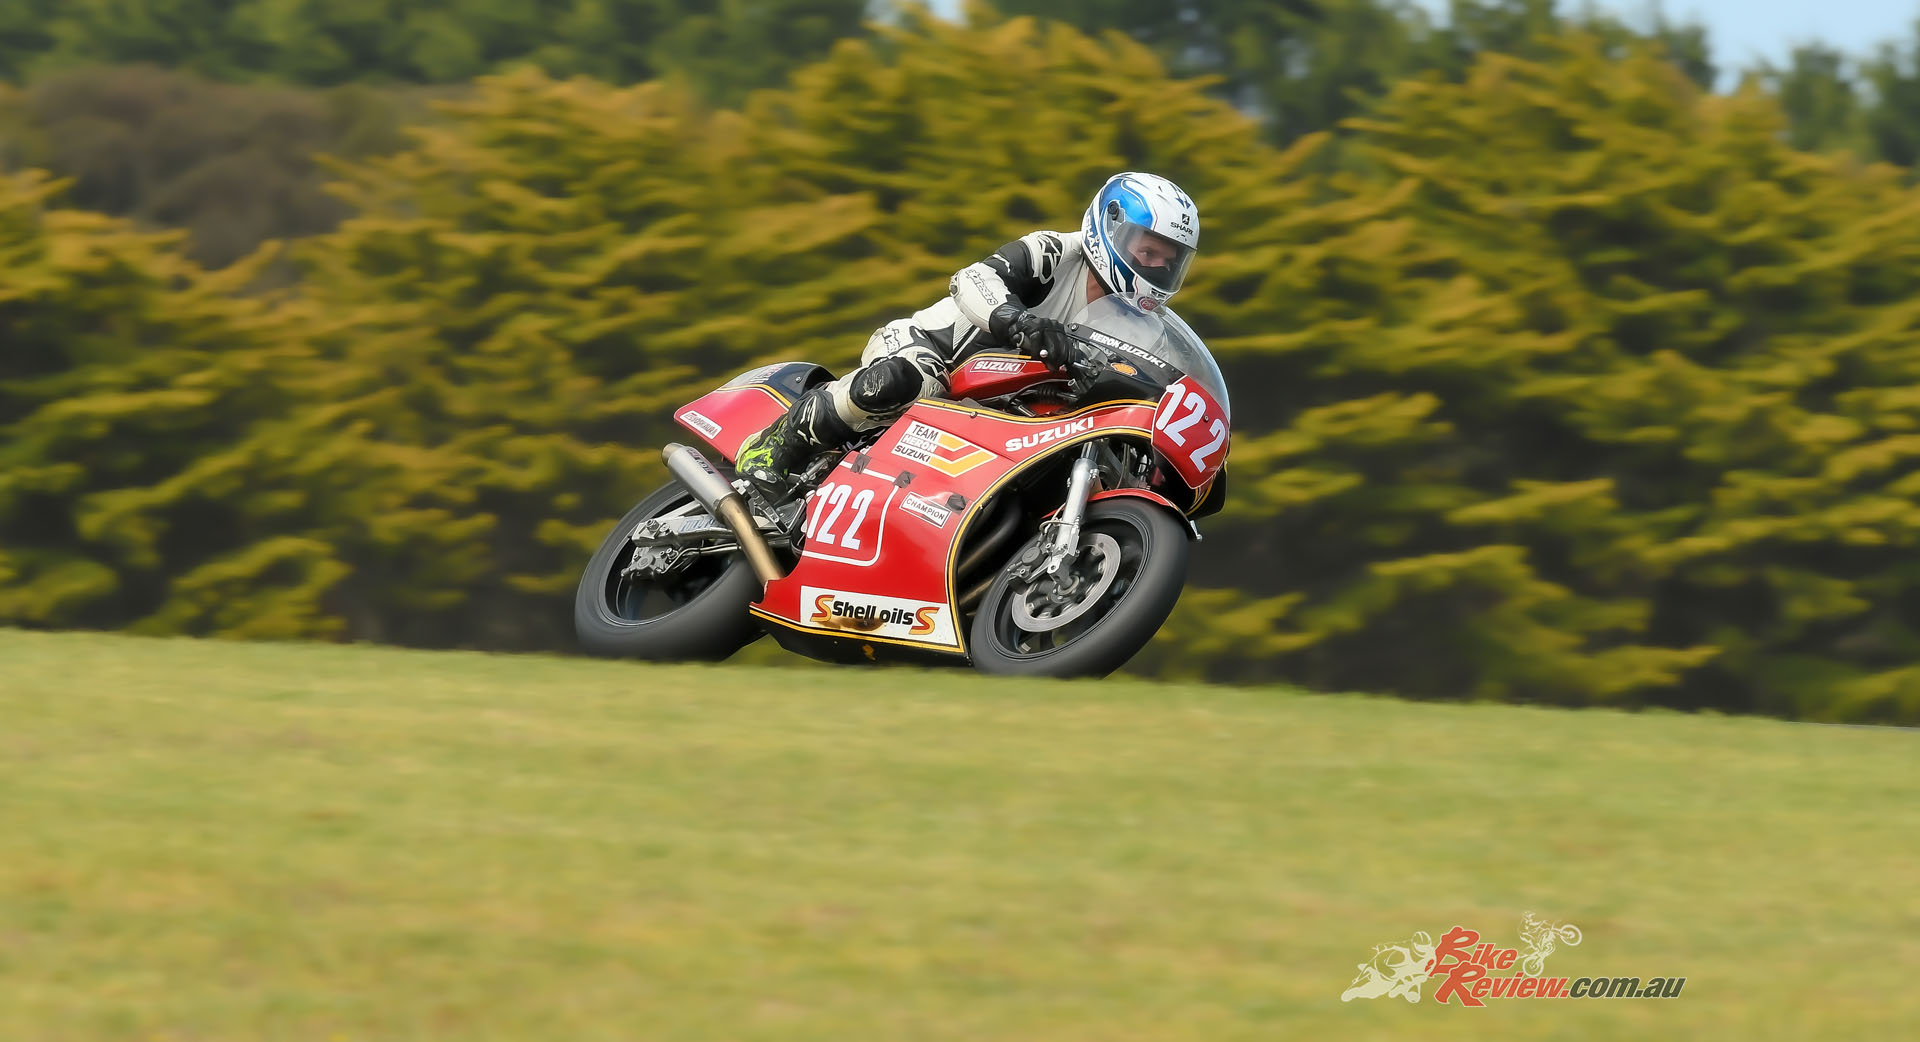 With the International Island Classic being cancelled for the past two years. The Superbike Masters series tagged along with the ASBK for round one...